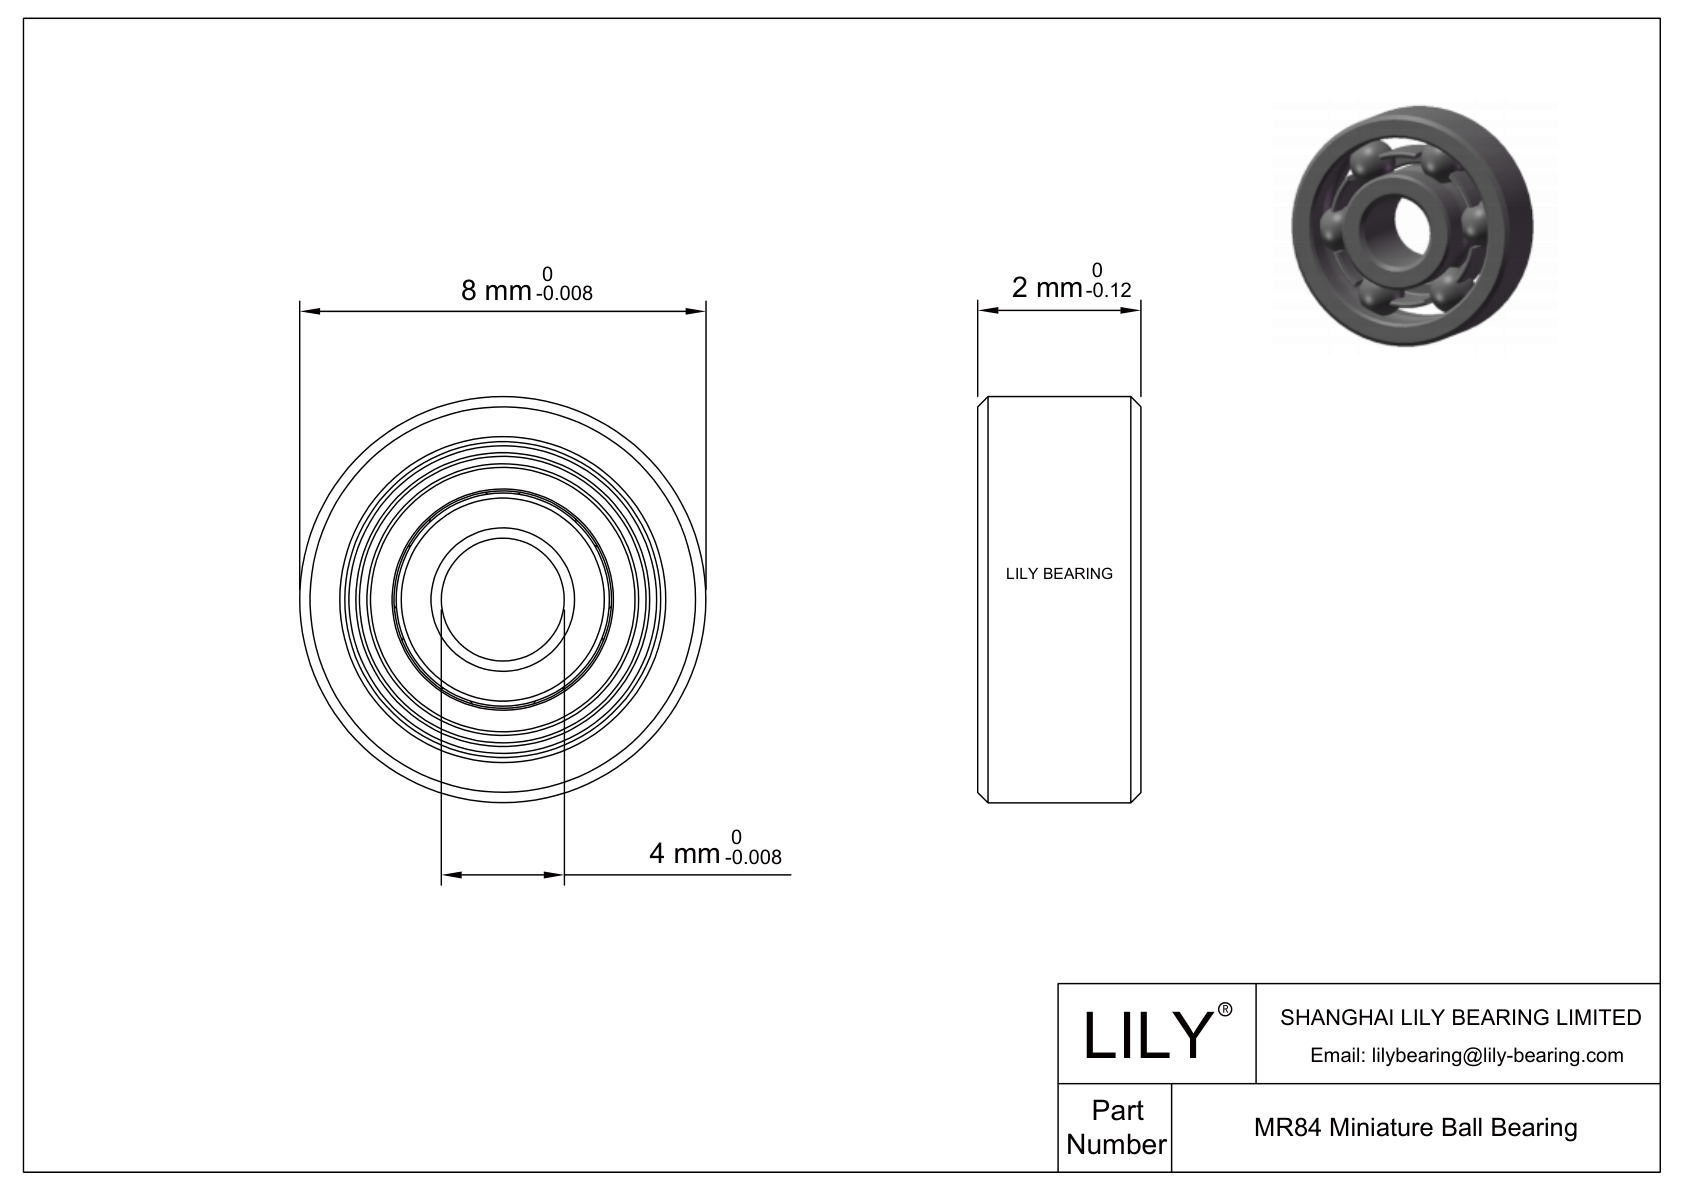 LILY-BSTMR8415-26 Outsourcing POM bearings cad drawing